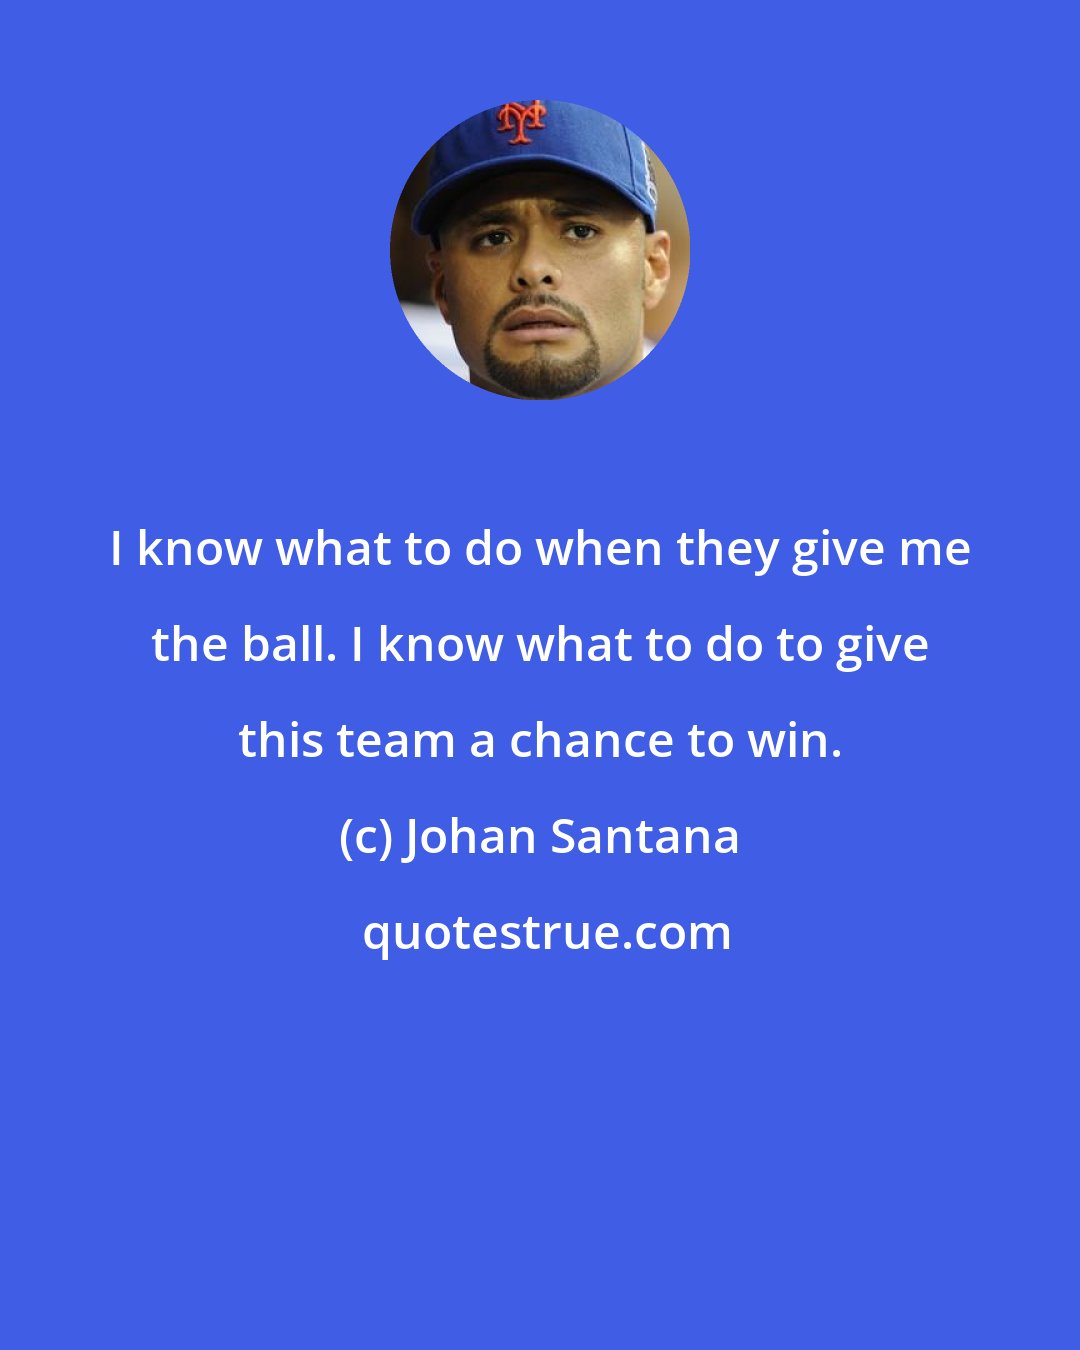 Johan Santana: I know what to do when they give me the ball. I know what to do to give this team a chance to win.